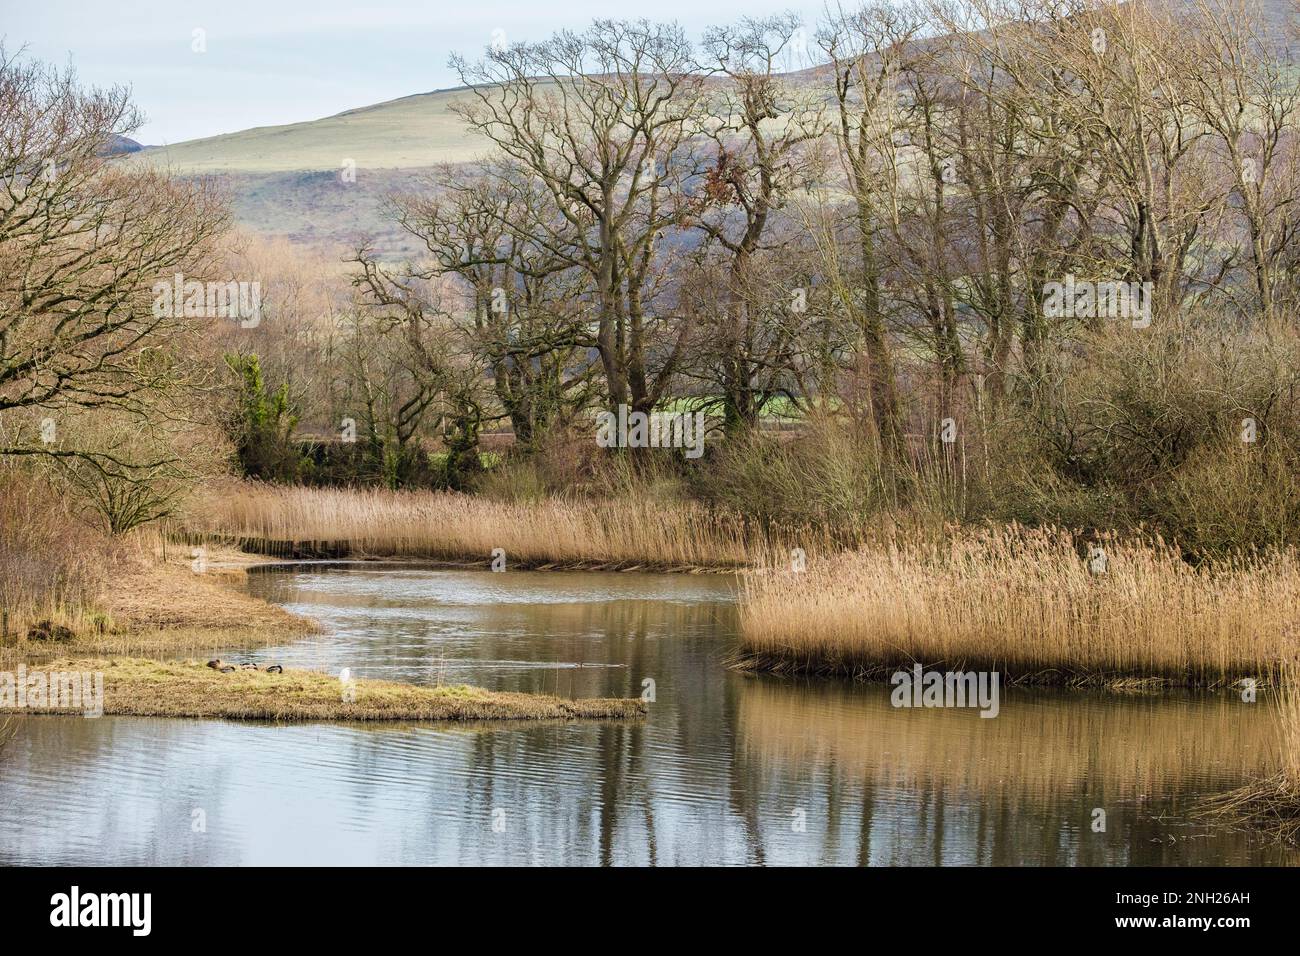 View across the reed lined lagoons in nature reserve. The Spinnies, Aberogwen, Bangor, Gwynedd, Wales, UK, Britain Stock Photo